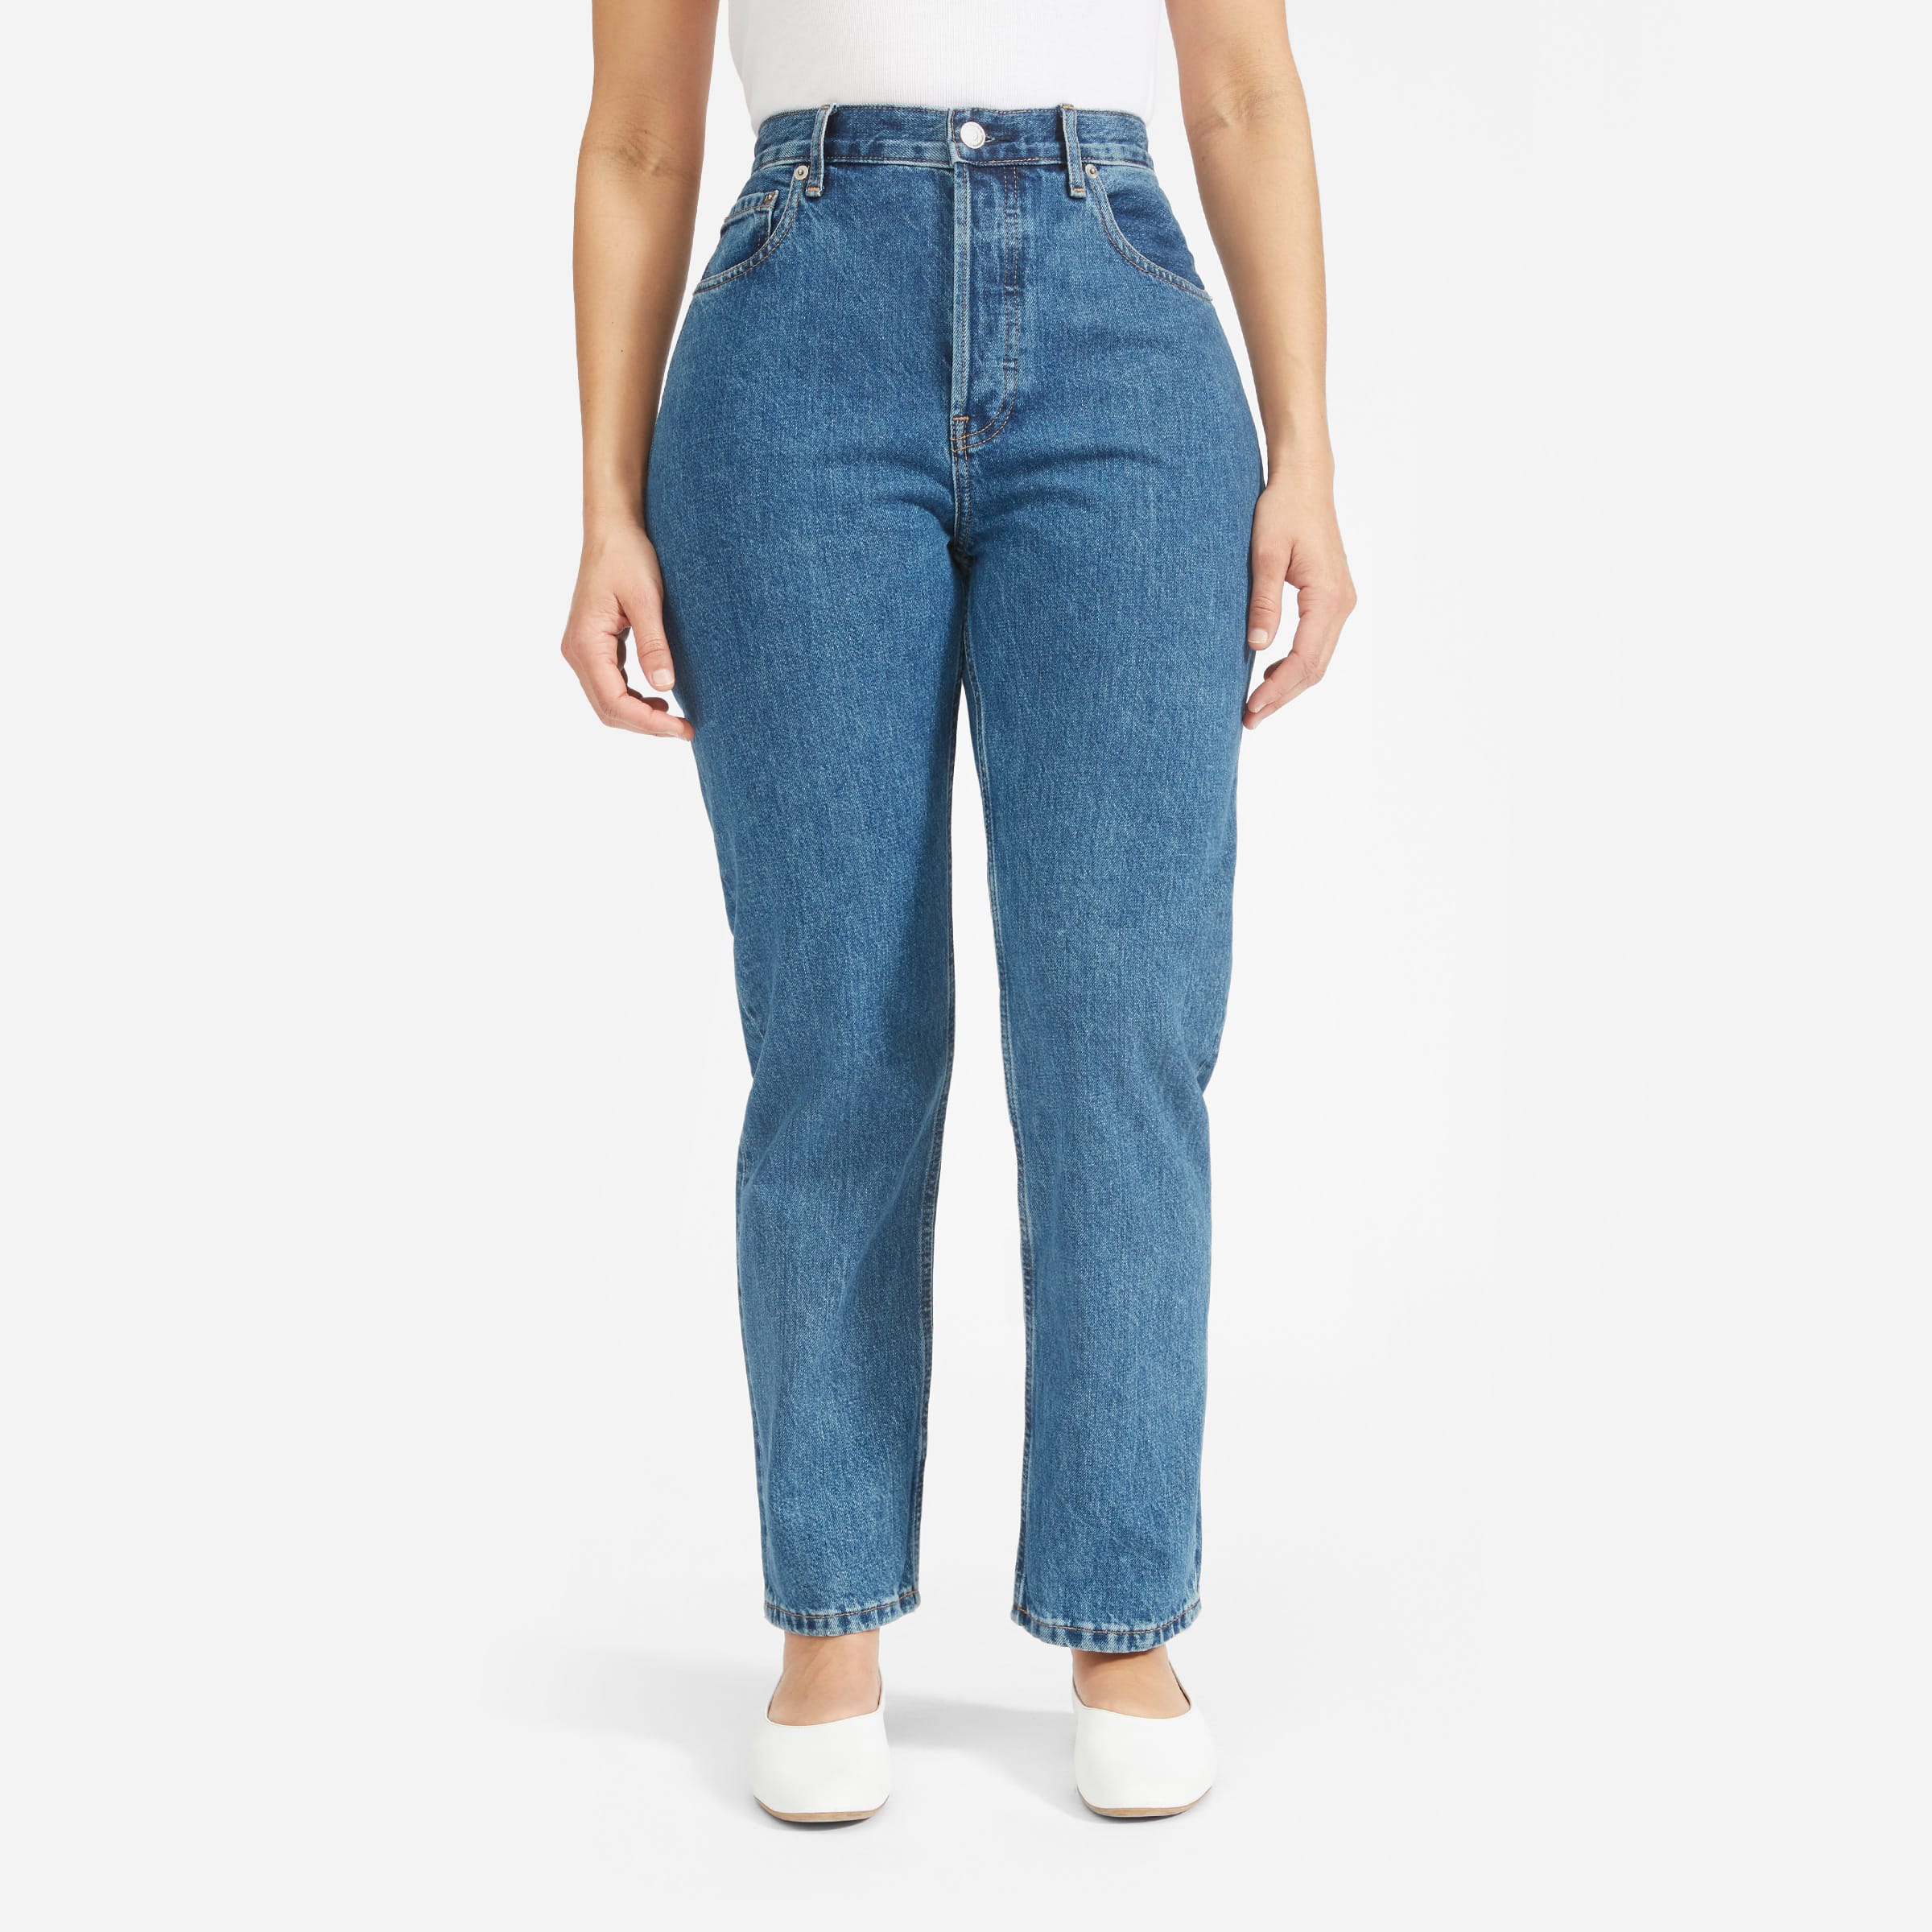 15 Best Pairs of Non-Stretch Jeans